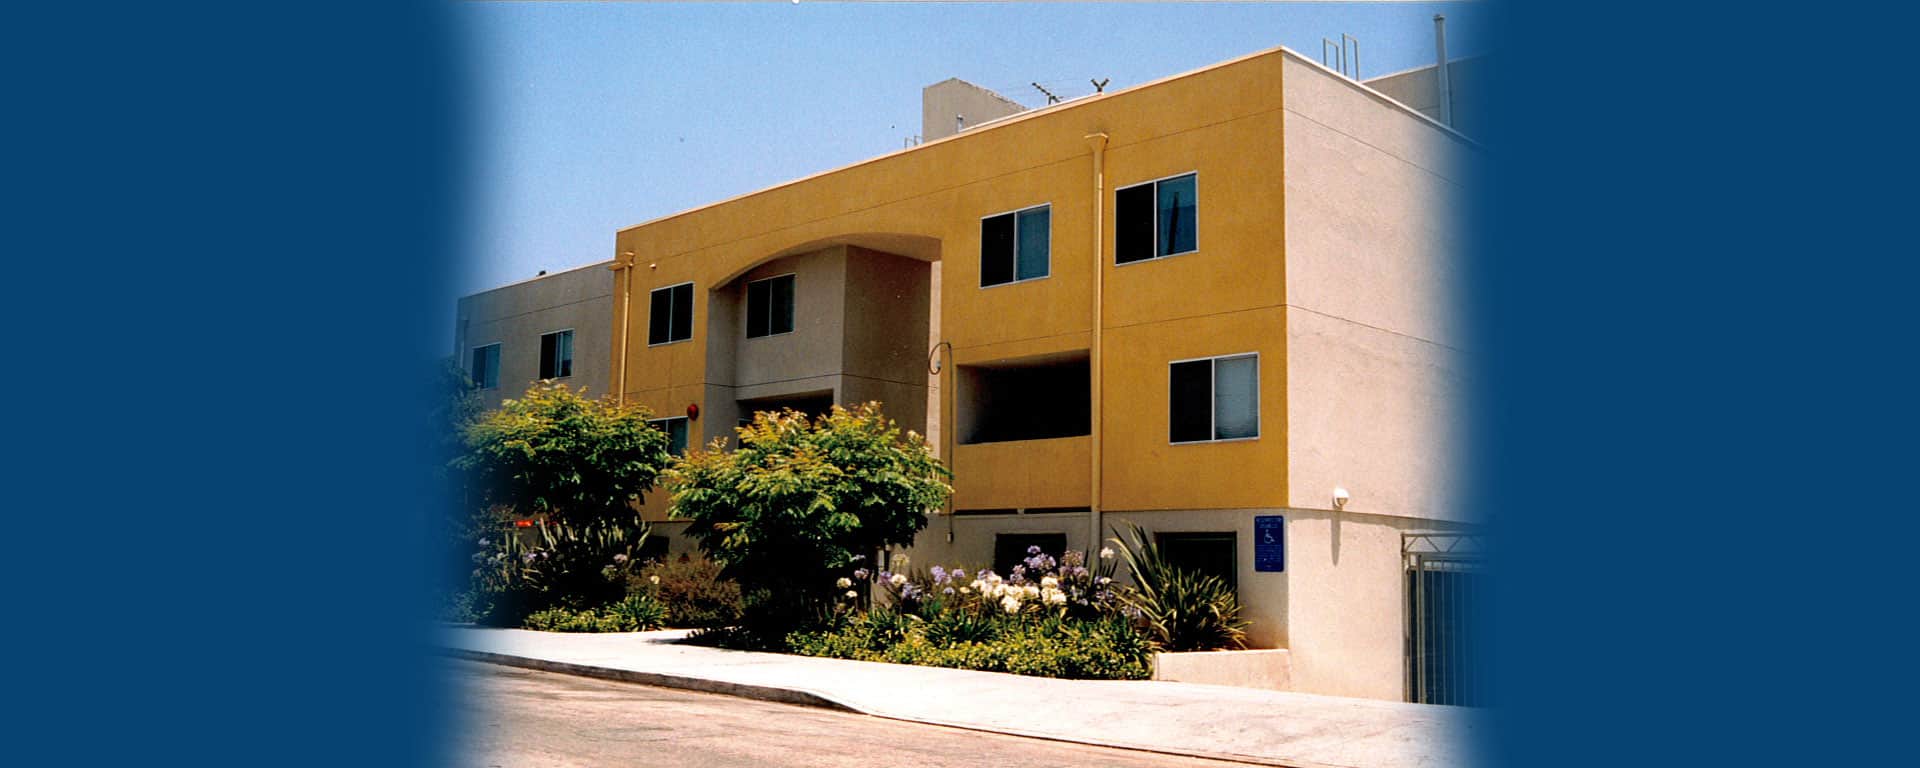 Barnsdall Court Affordable/ Public Housing